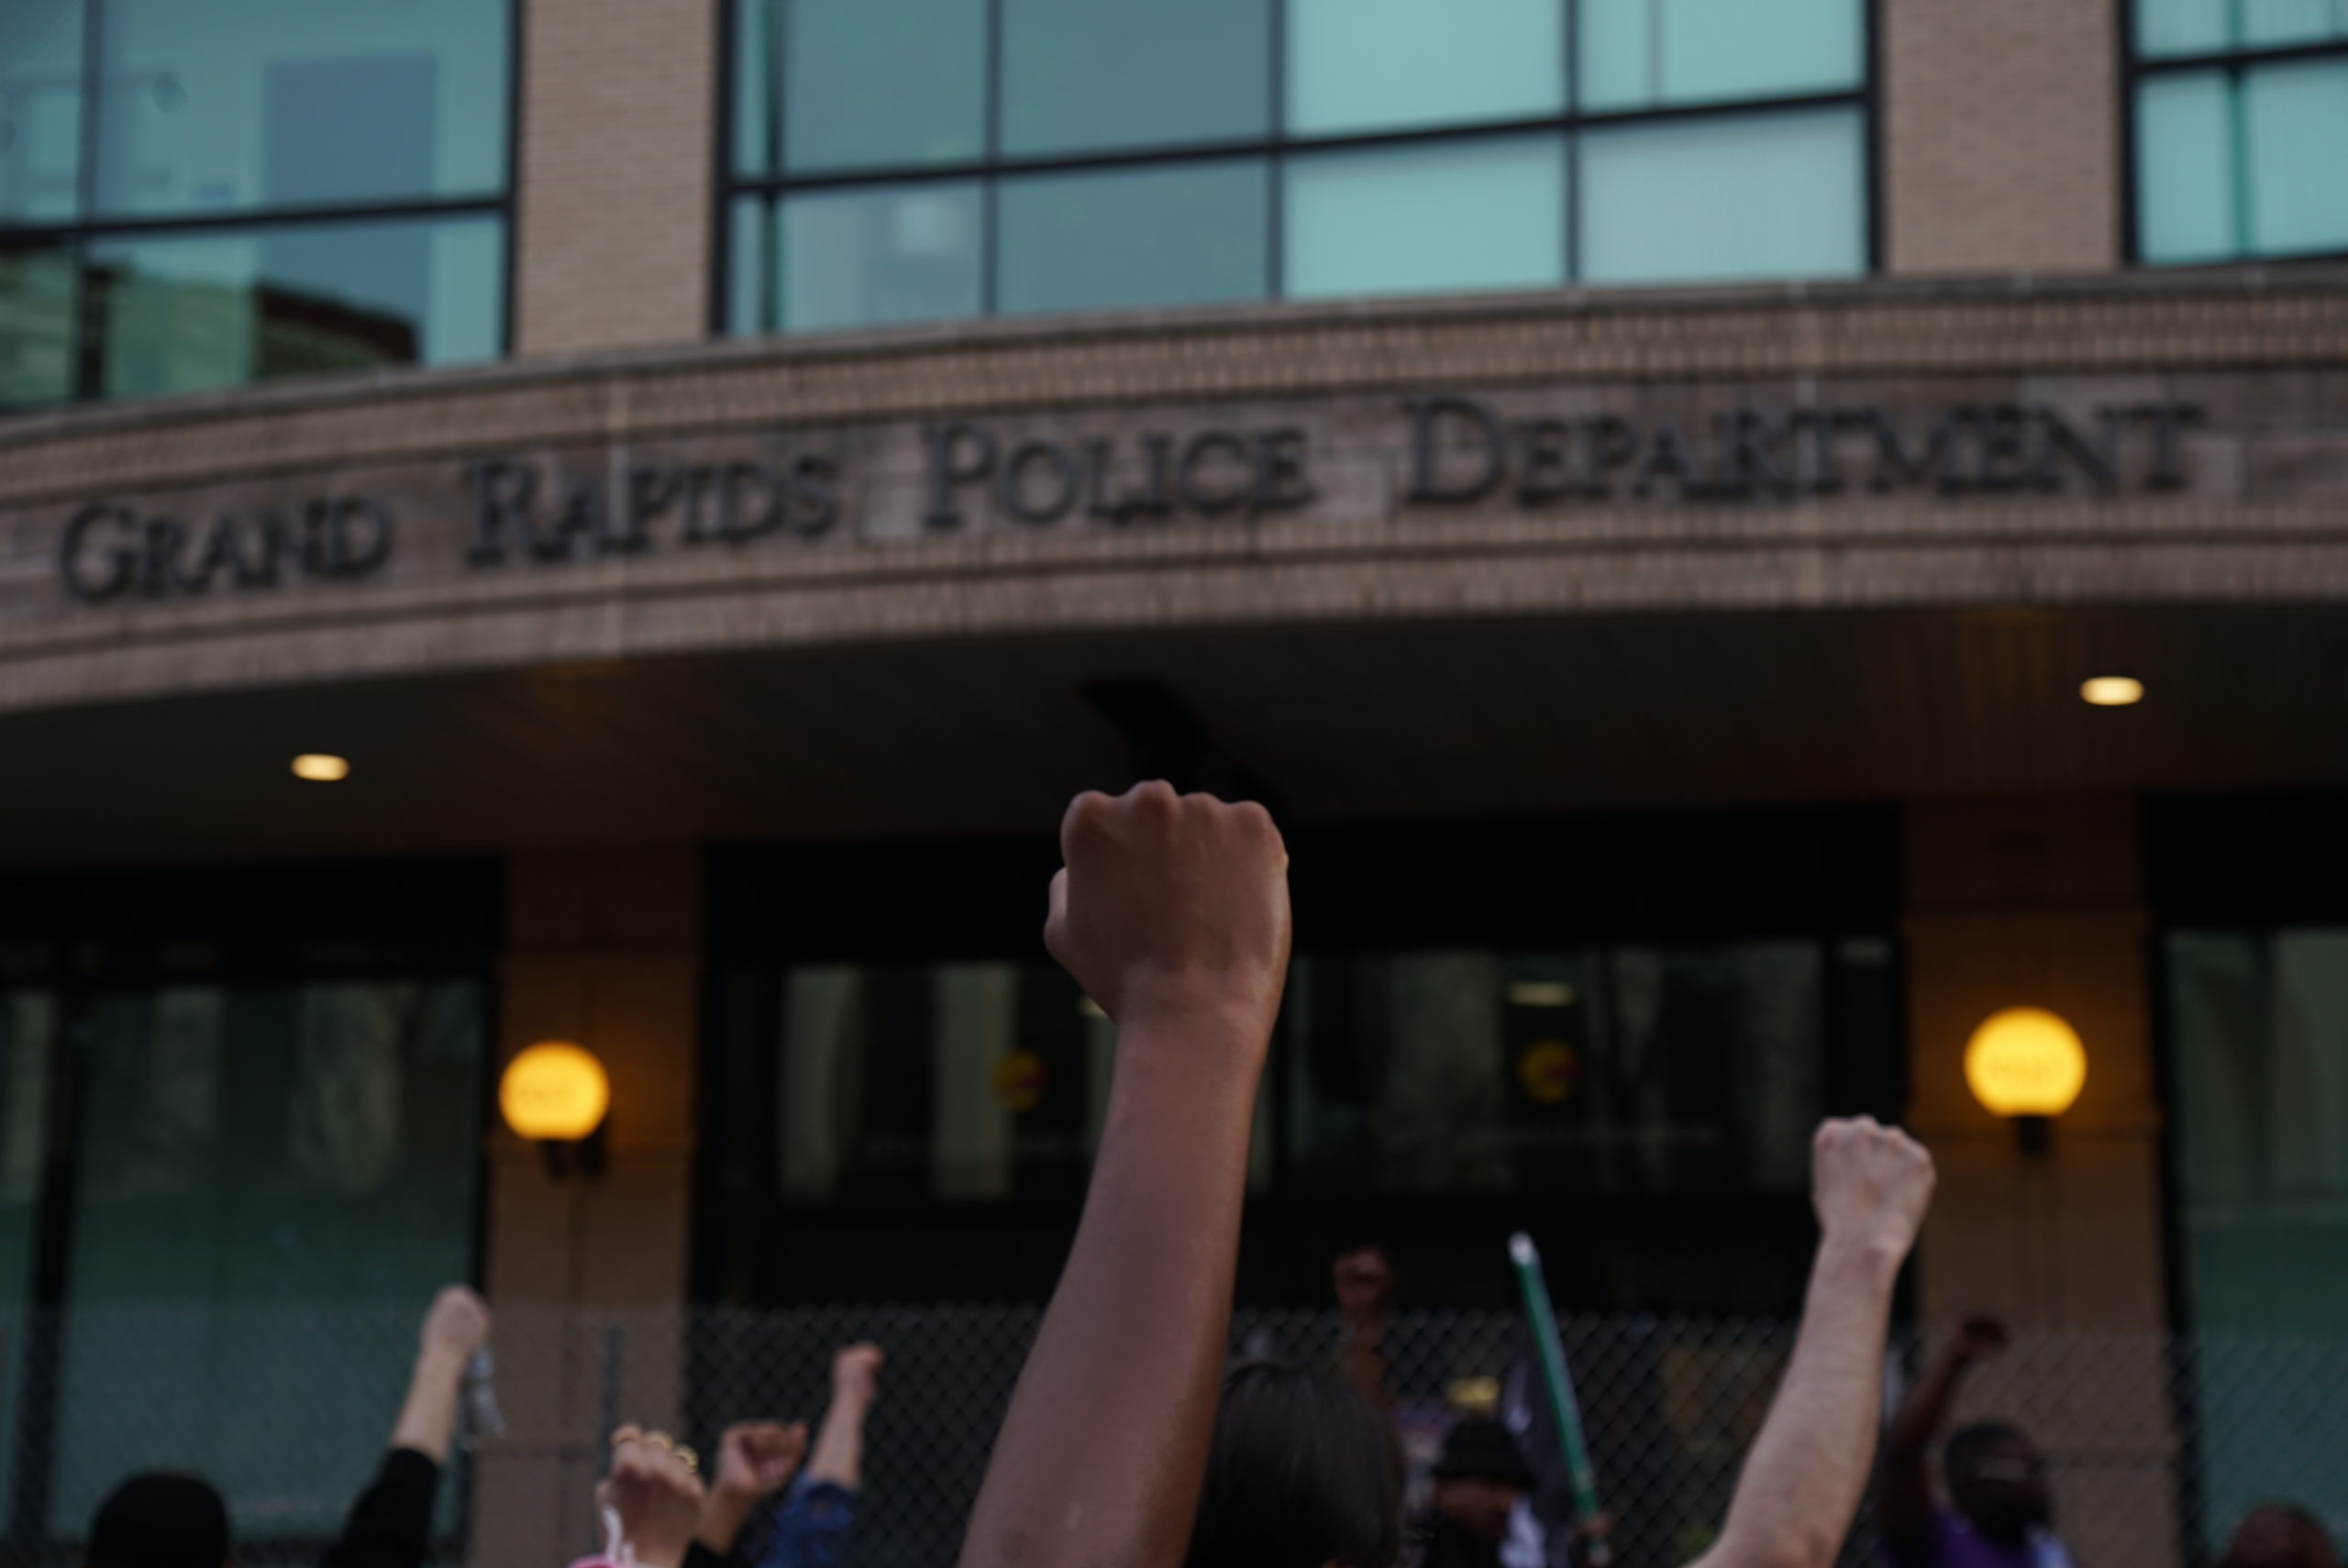 Protestors gather outside of the Grand Rapids, Michigan police station to protest the killing of Patrick Lyoya. (Trone Dowd for VICE News)